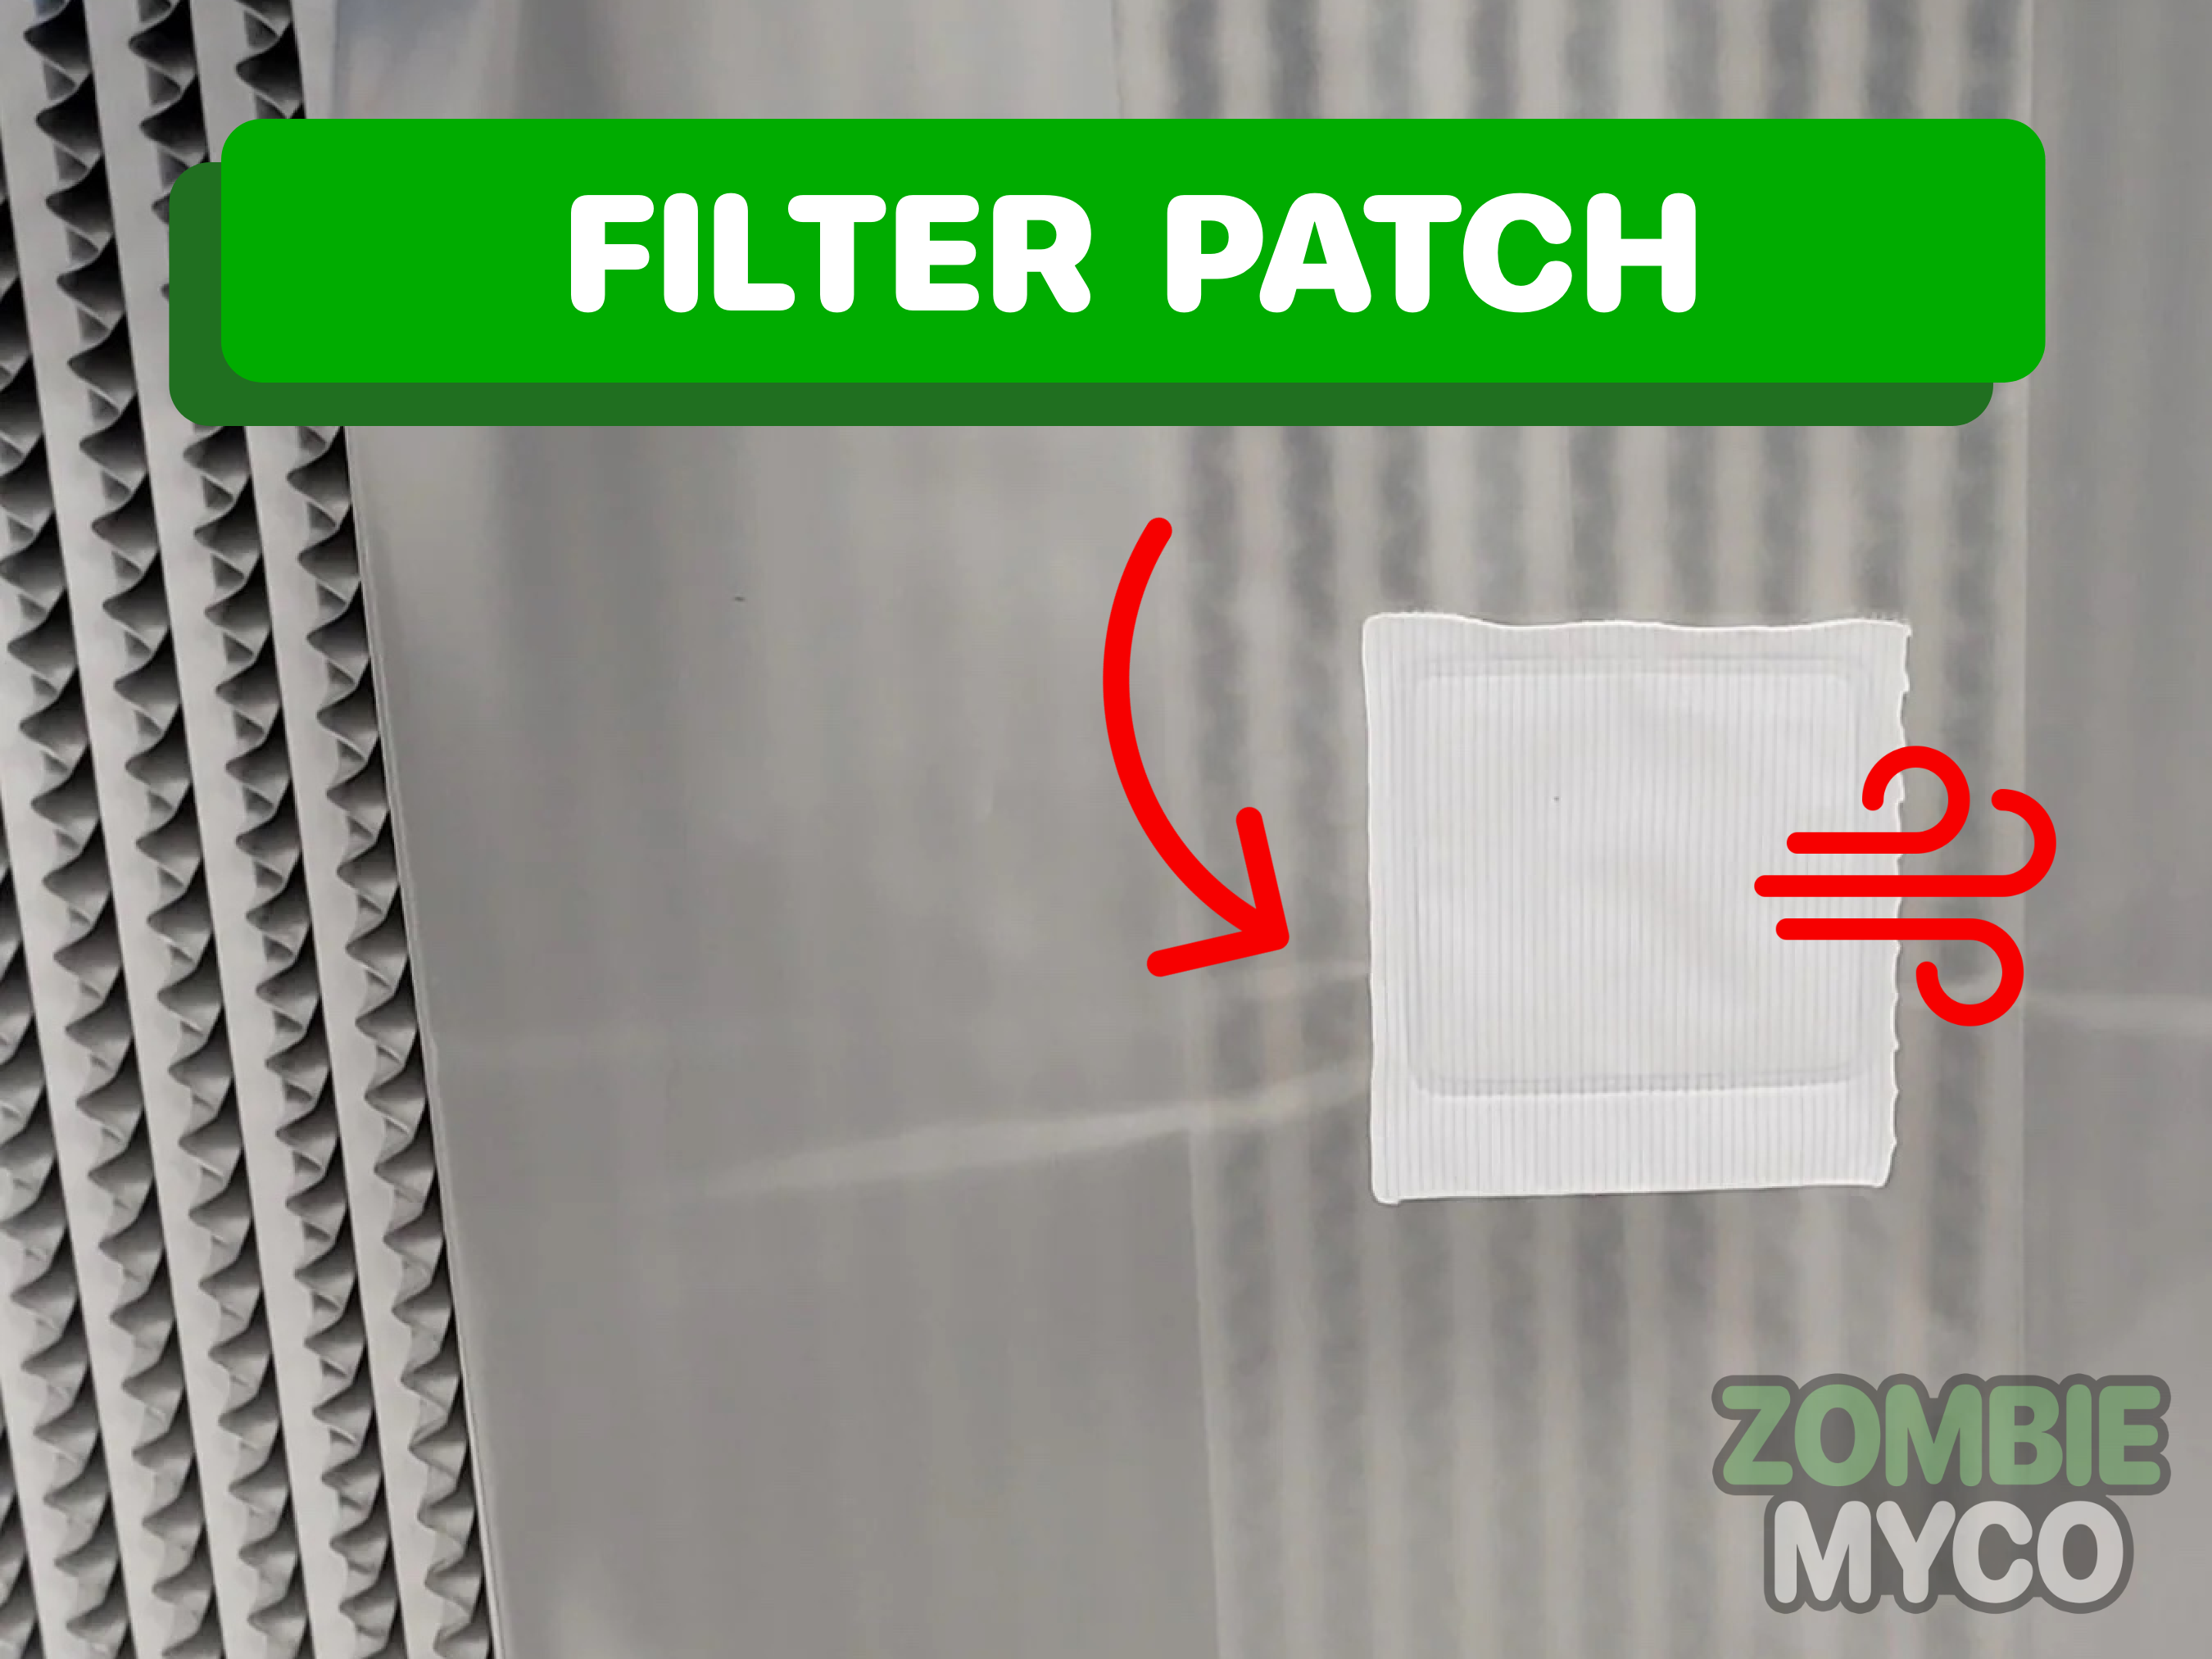 AN IMAGE OF THE FILTER PATCH